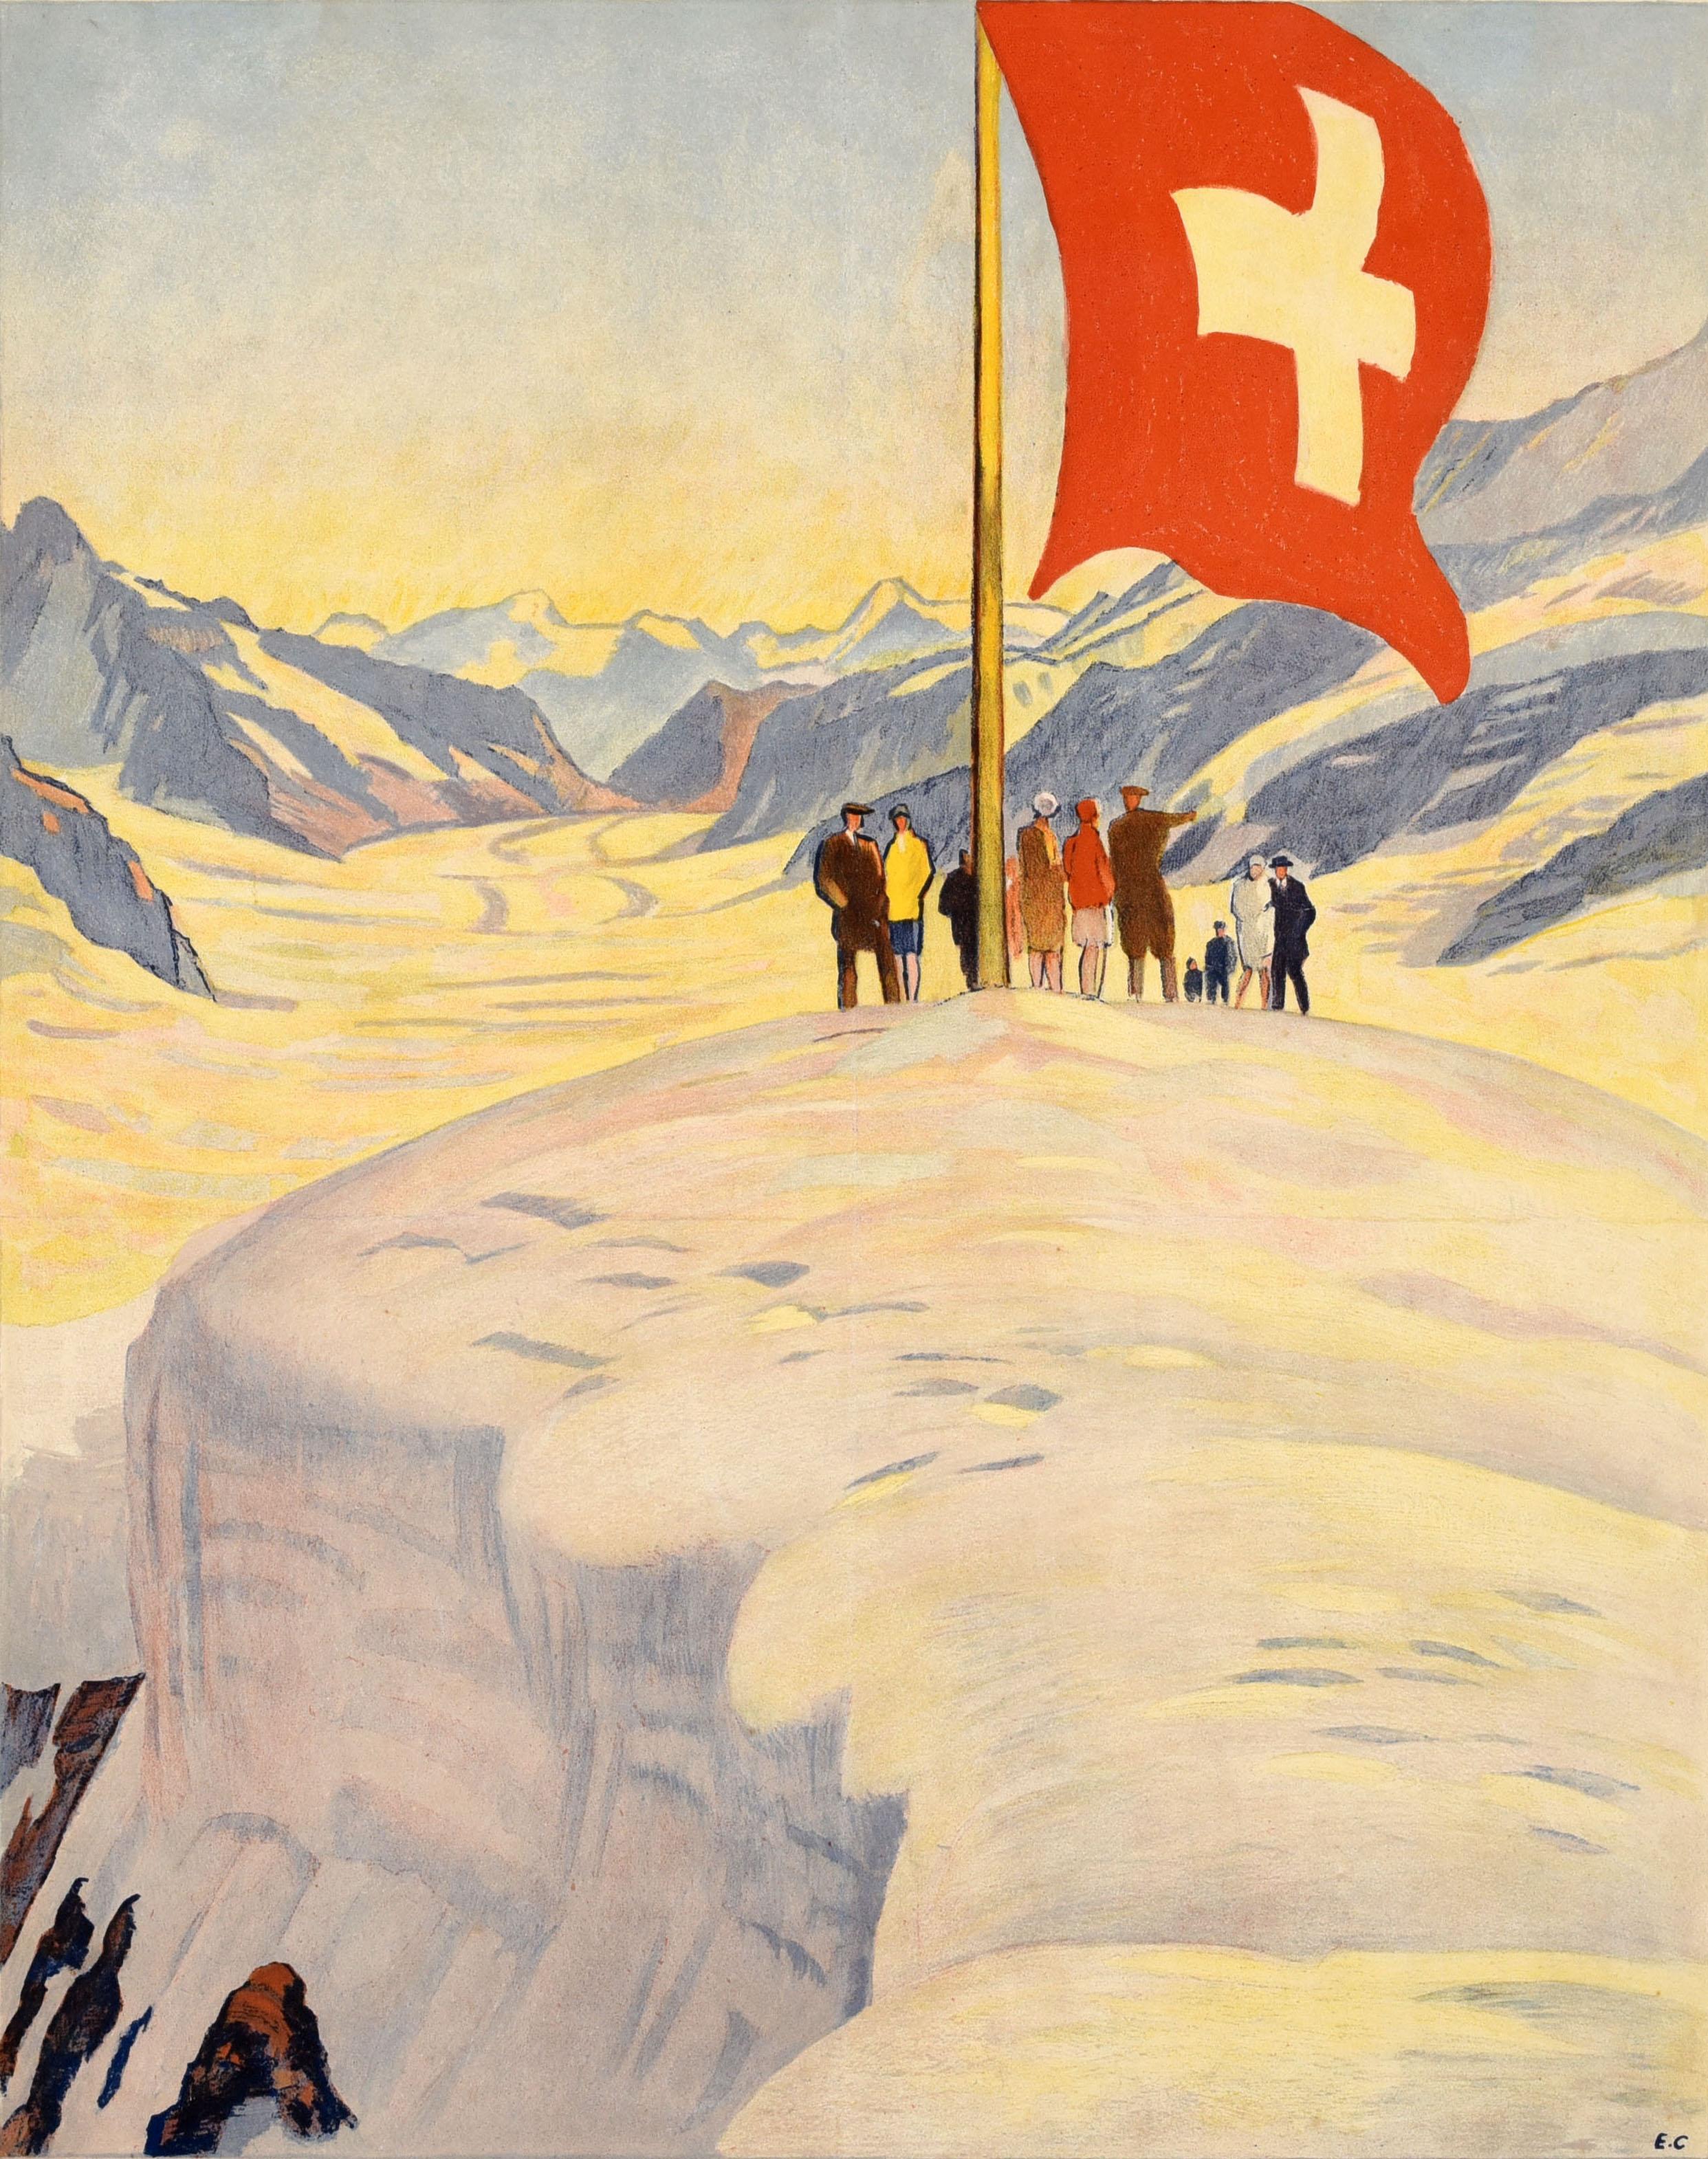 Original antique winter travel poster for the Jungfrau Railway Bernese Oberland Switzerland featuring great artwork by Emil Cardineaux (1877-1936) of a group of people on a snow topped mountain under the Swiss flag with a valley below and mountain